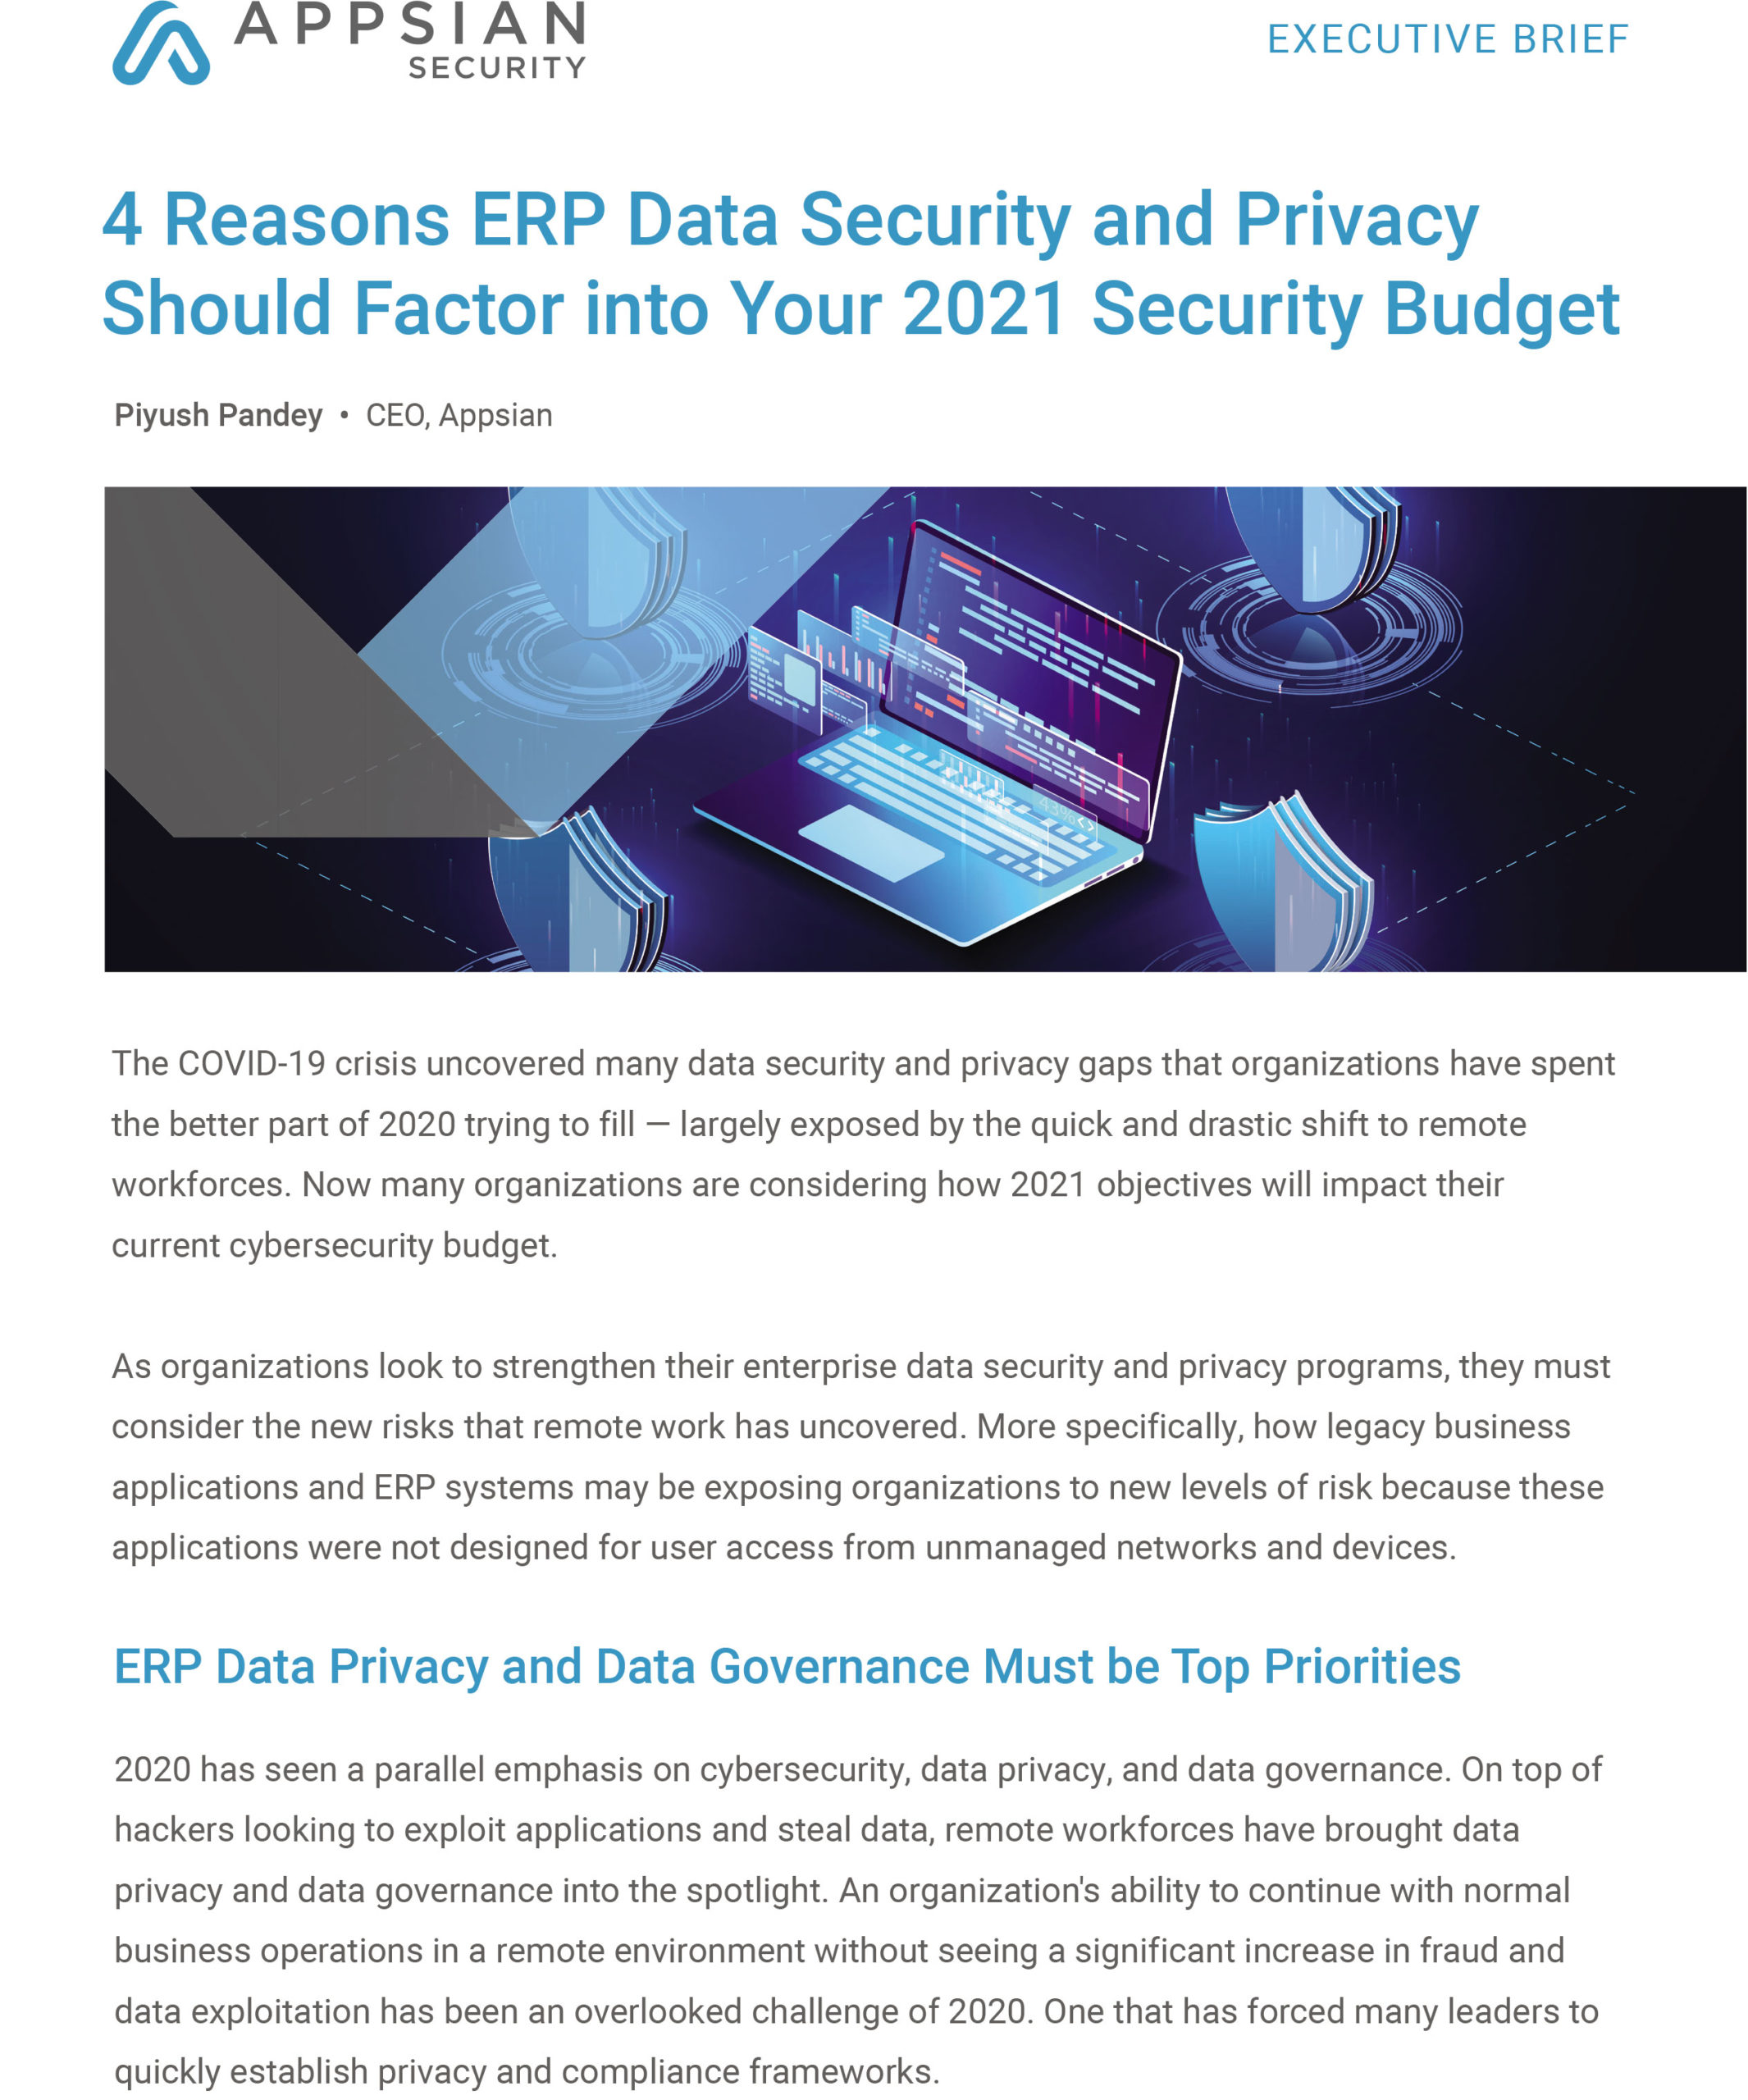 4 Reasons ERP Data Security and Privacy Should Factor into Your 2021 Security Budget